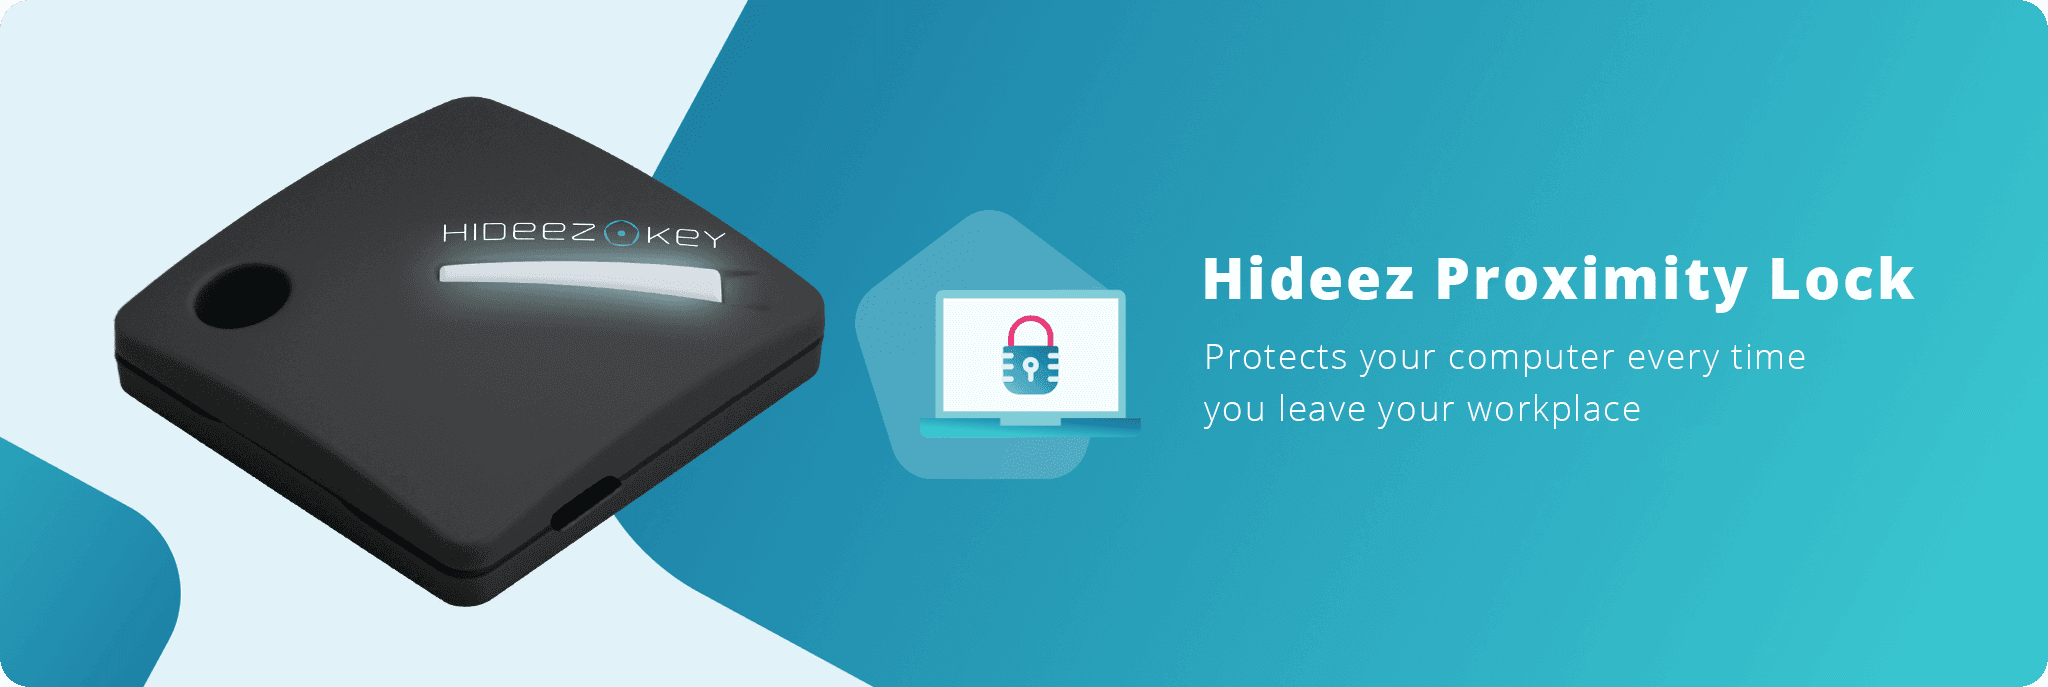 Hideez Smart Lock protects your PC by proximity